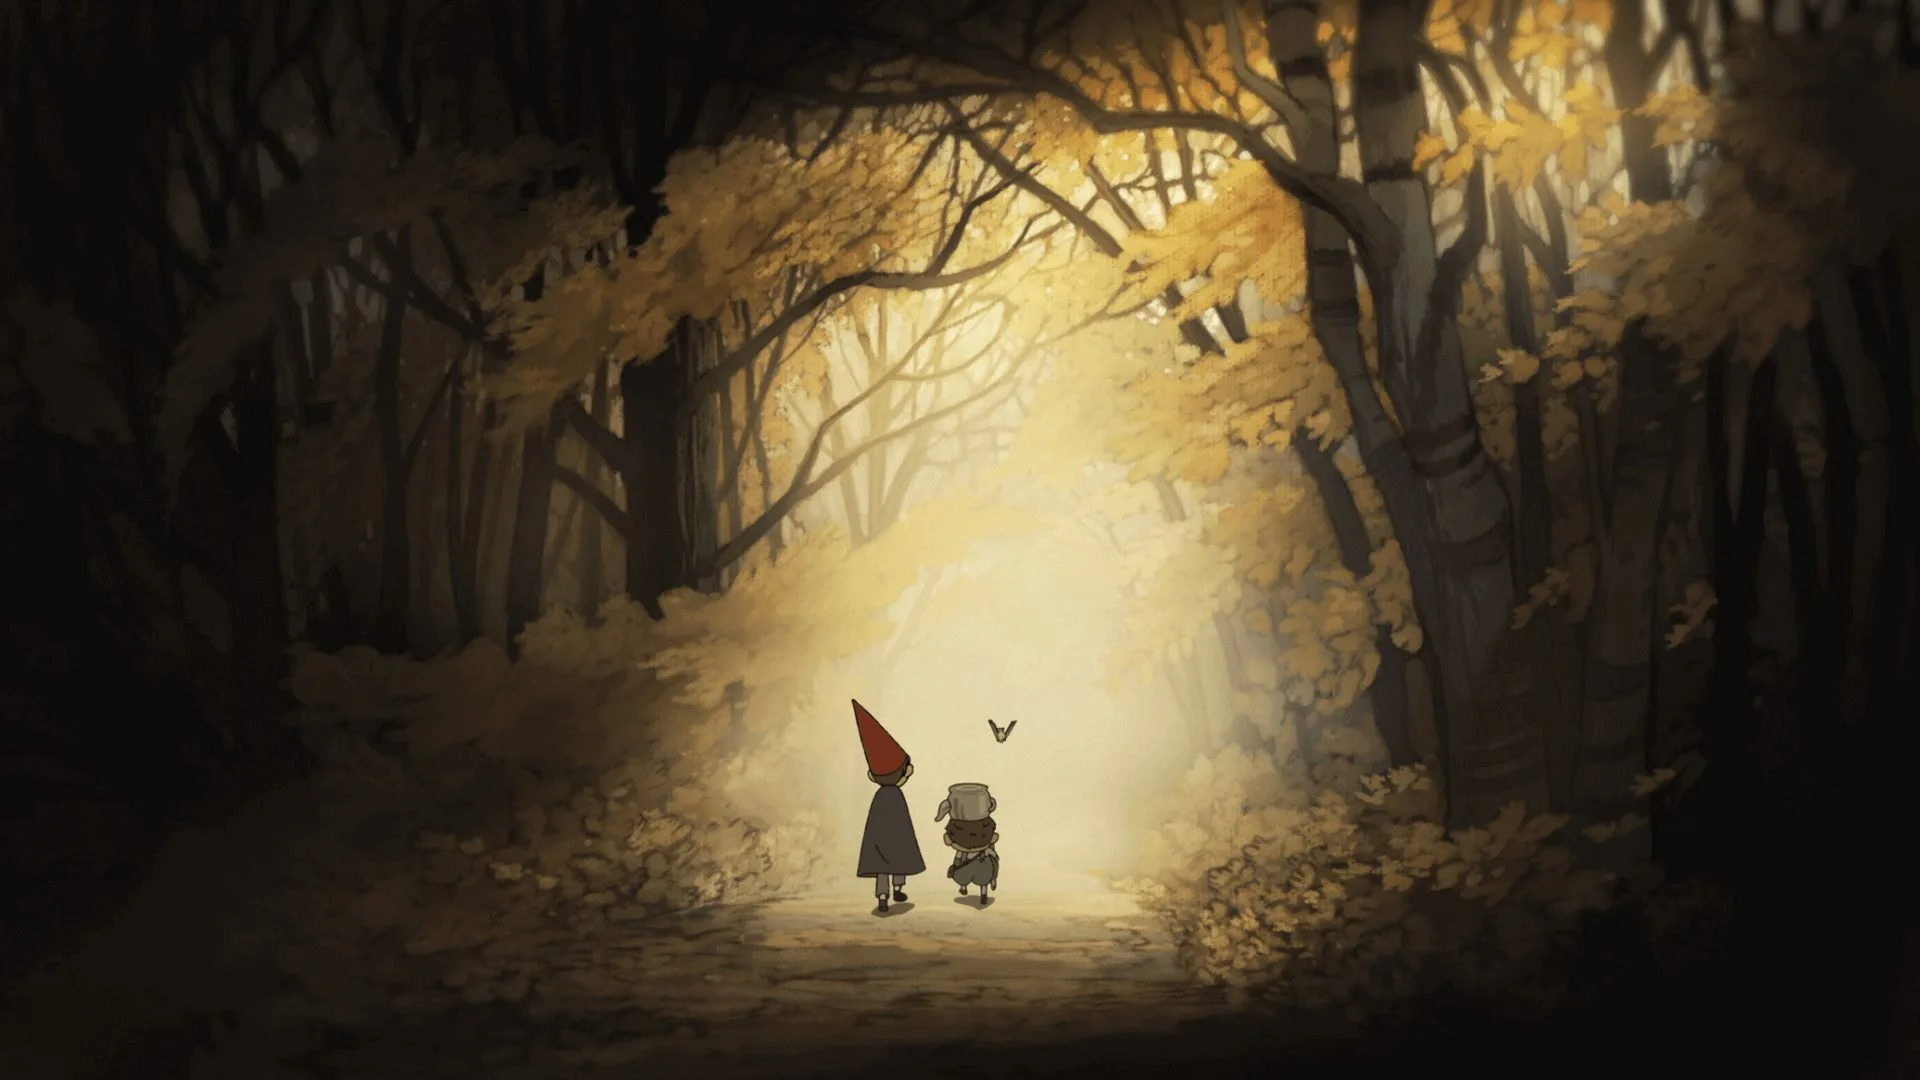 Two animated creatures walk through a gorgeously animated fall setting